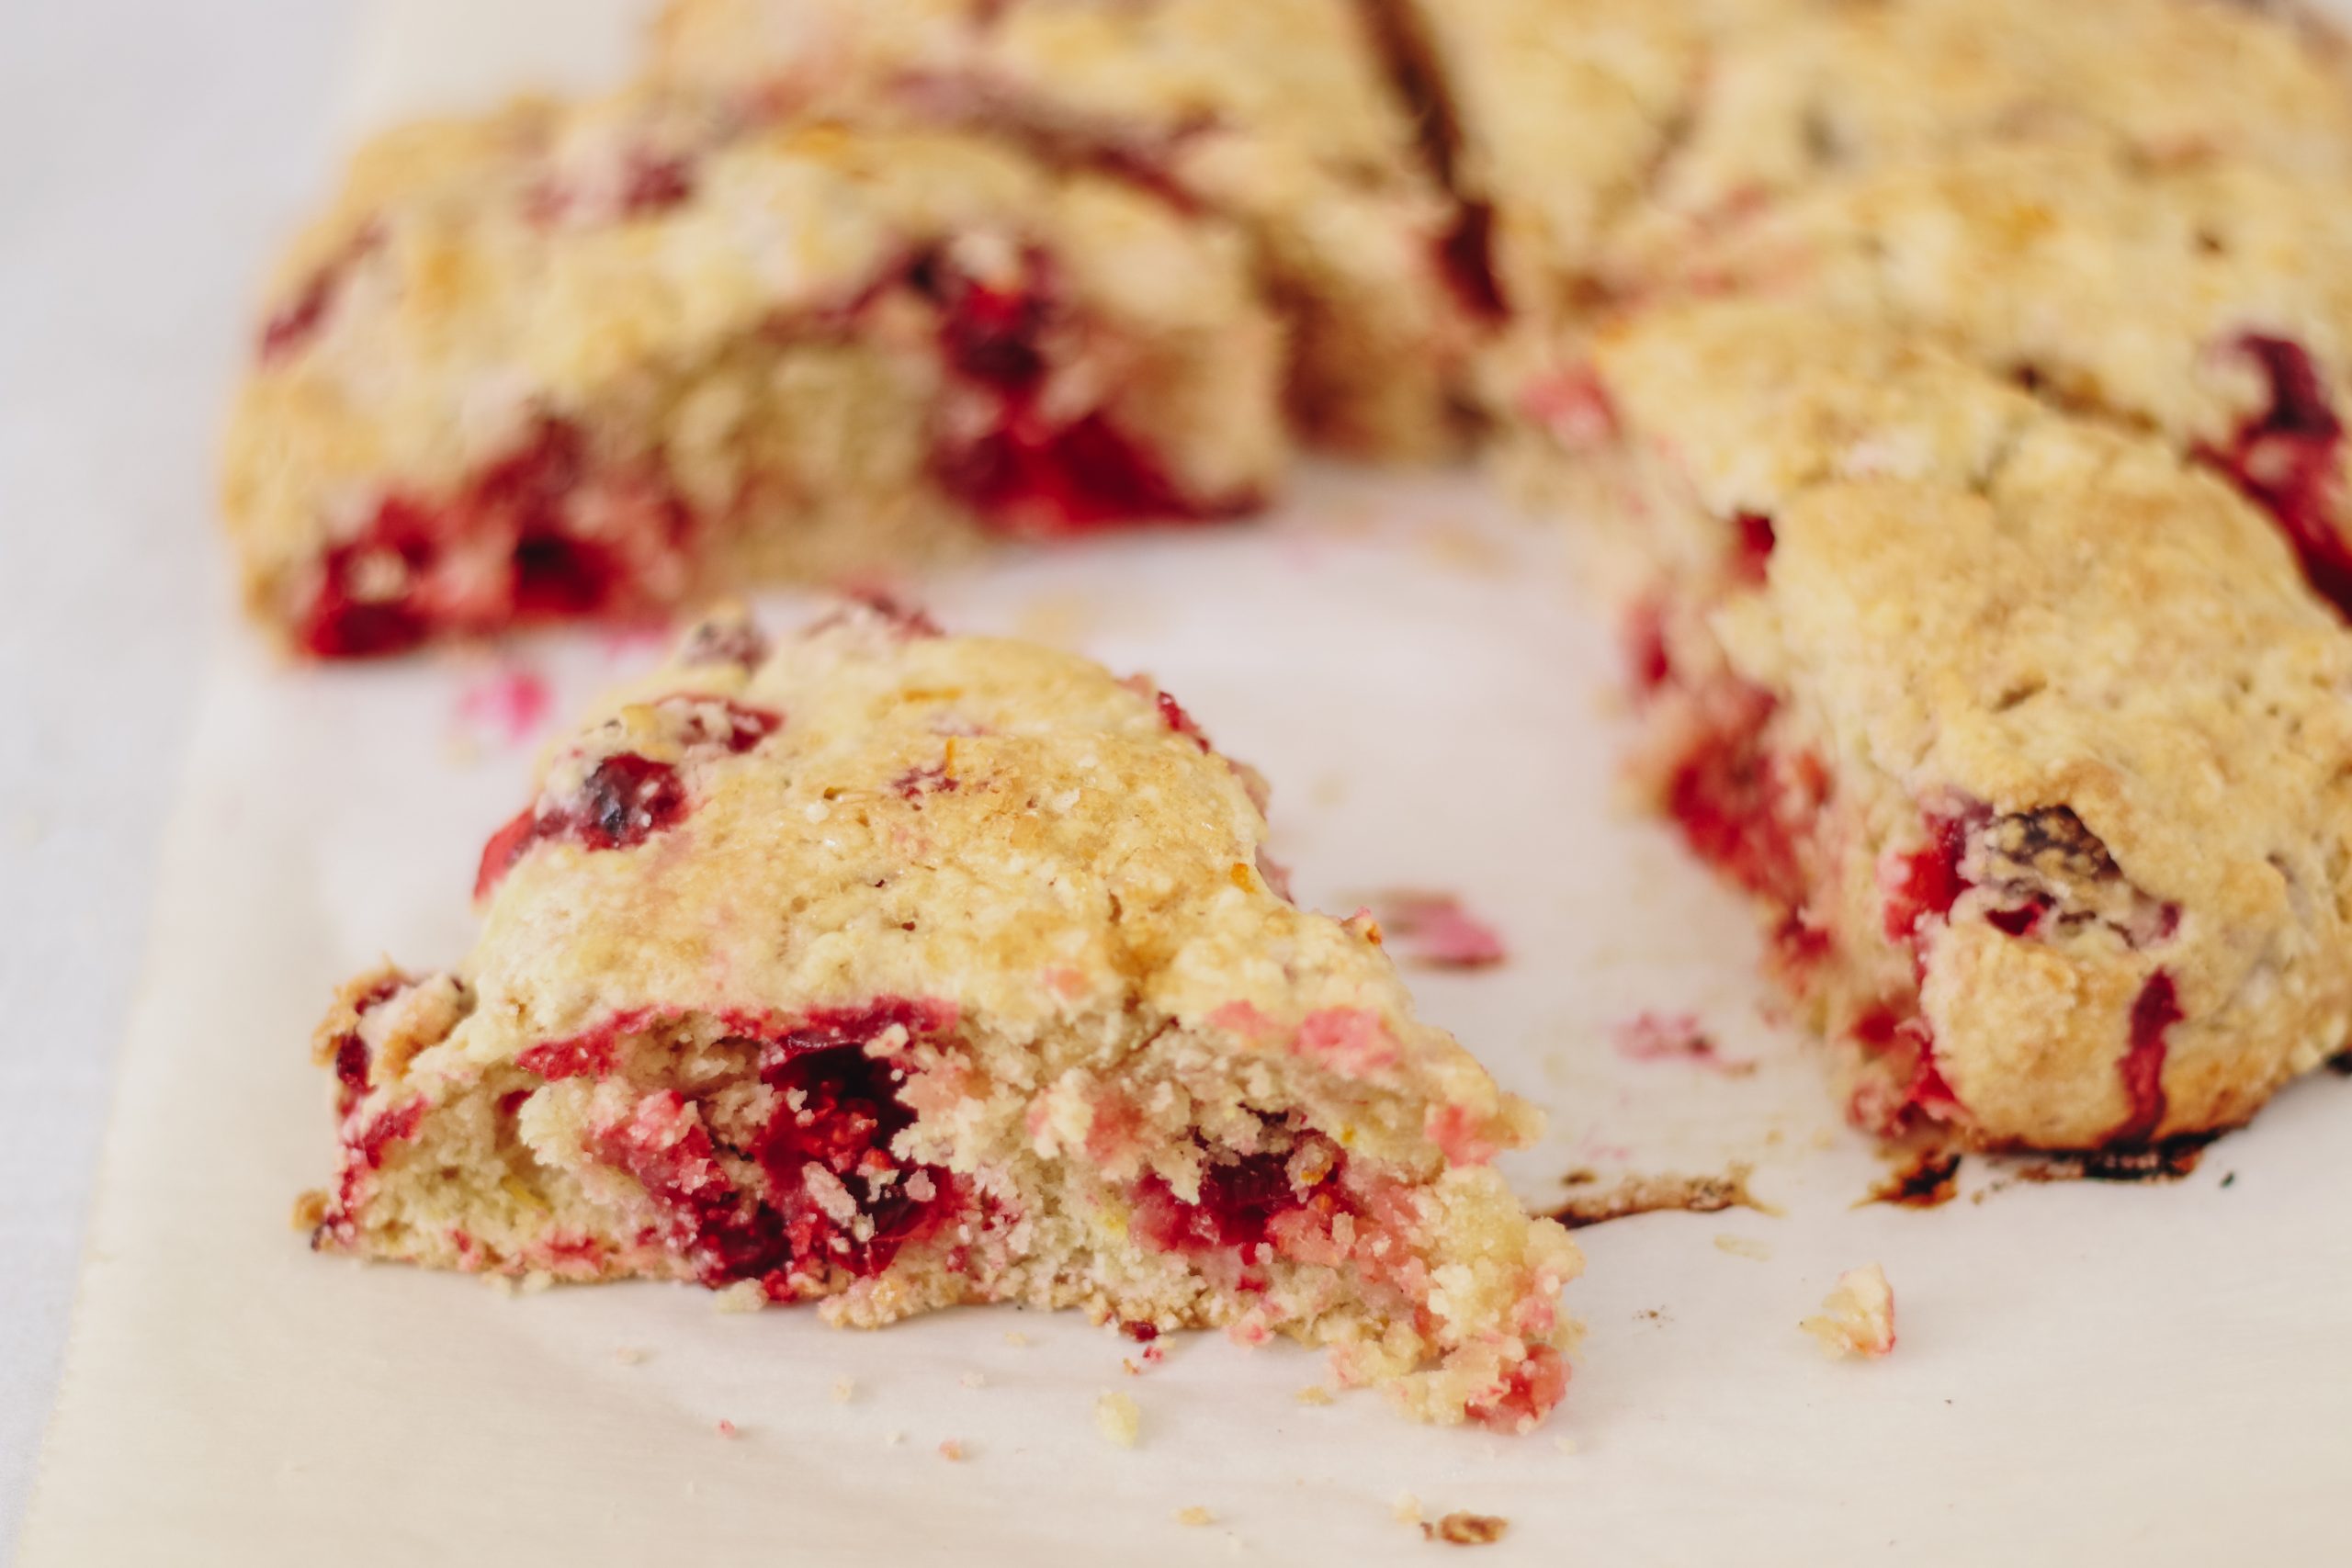 Vegan Clementine Cranberry Scones are flaky and delicious. These delightful scones are bursting with clementine flavor and juicy tart cranberries. Completely dairy free and so easy to make!